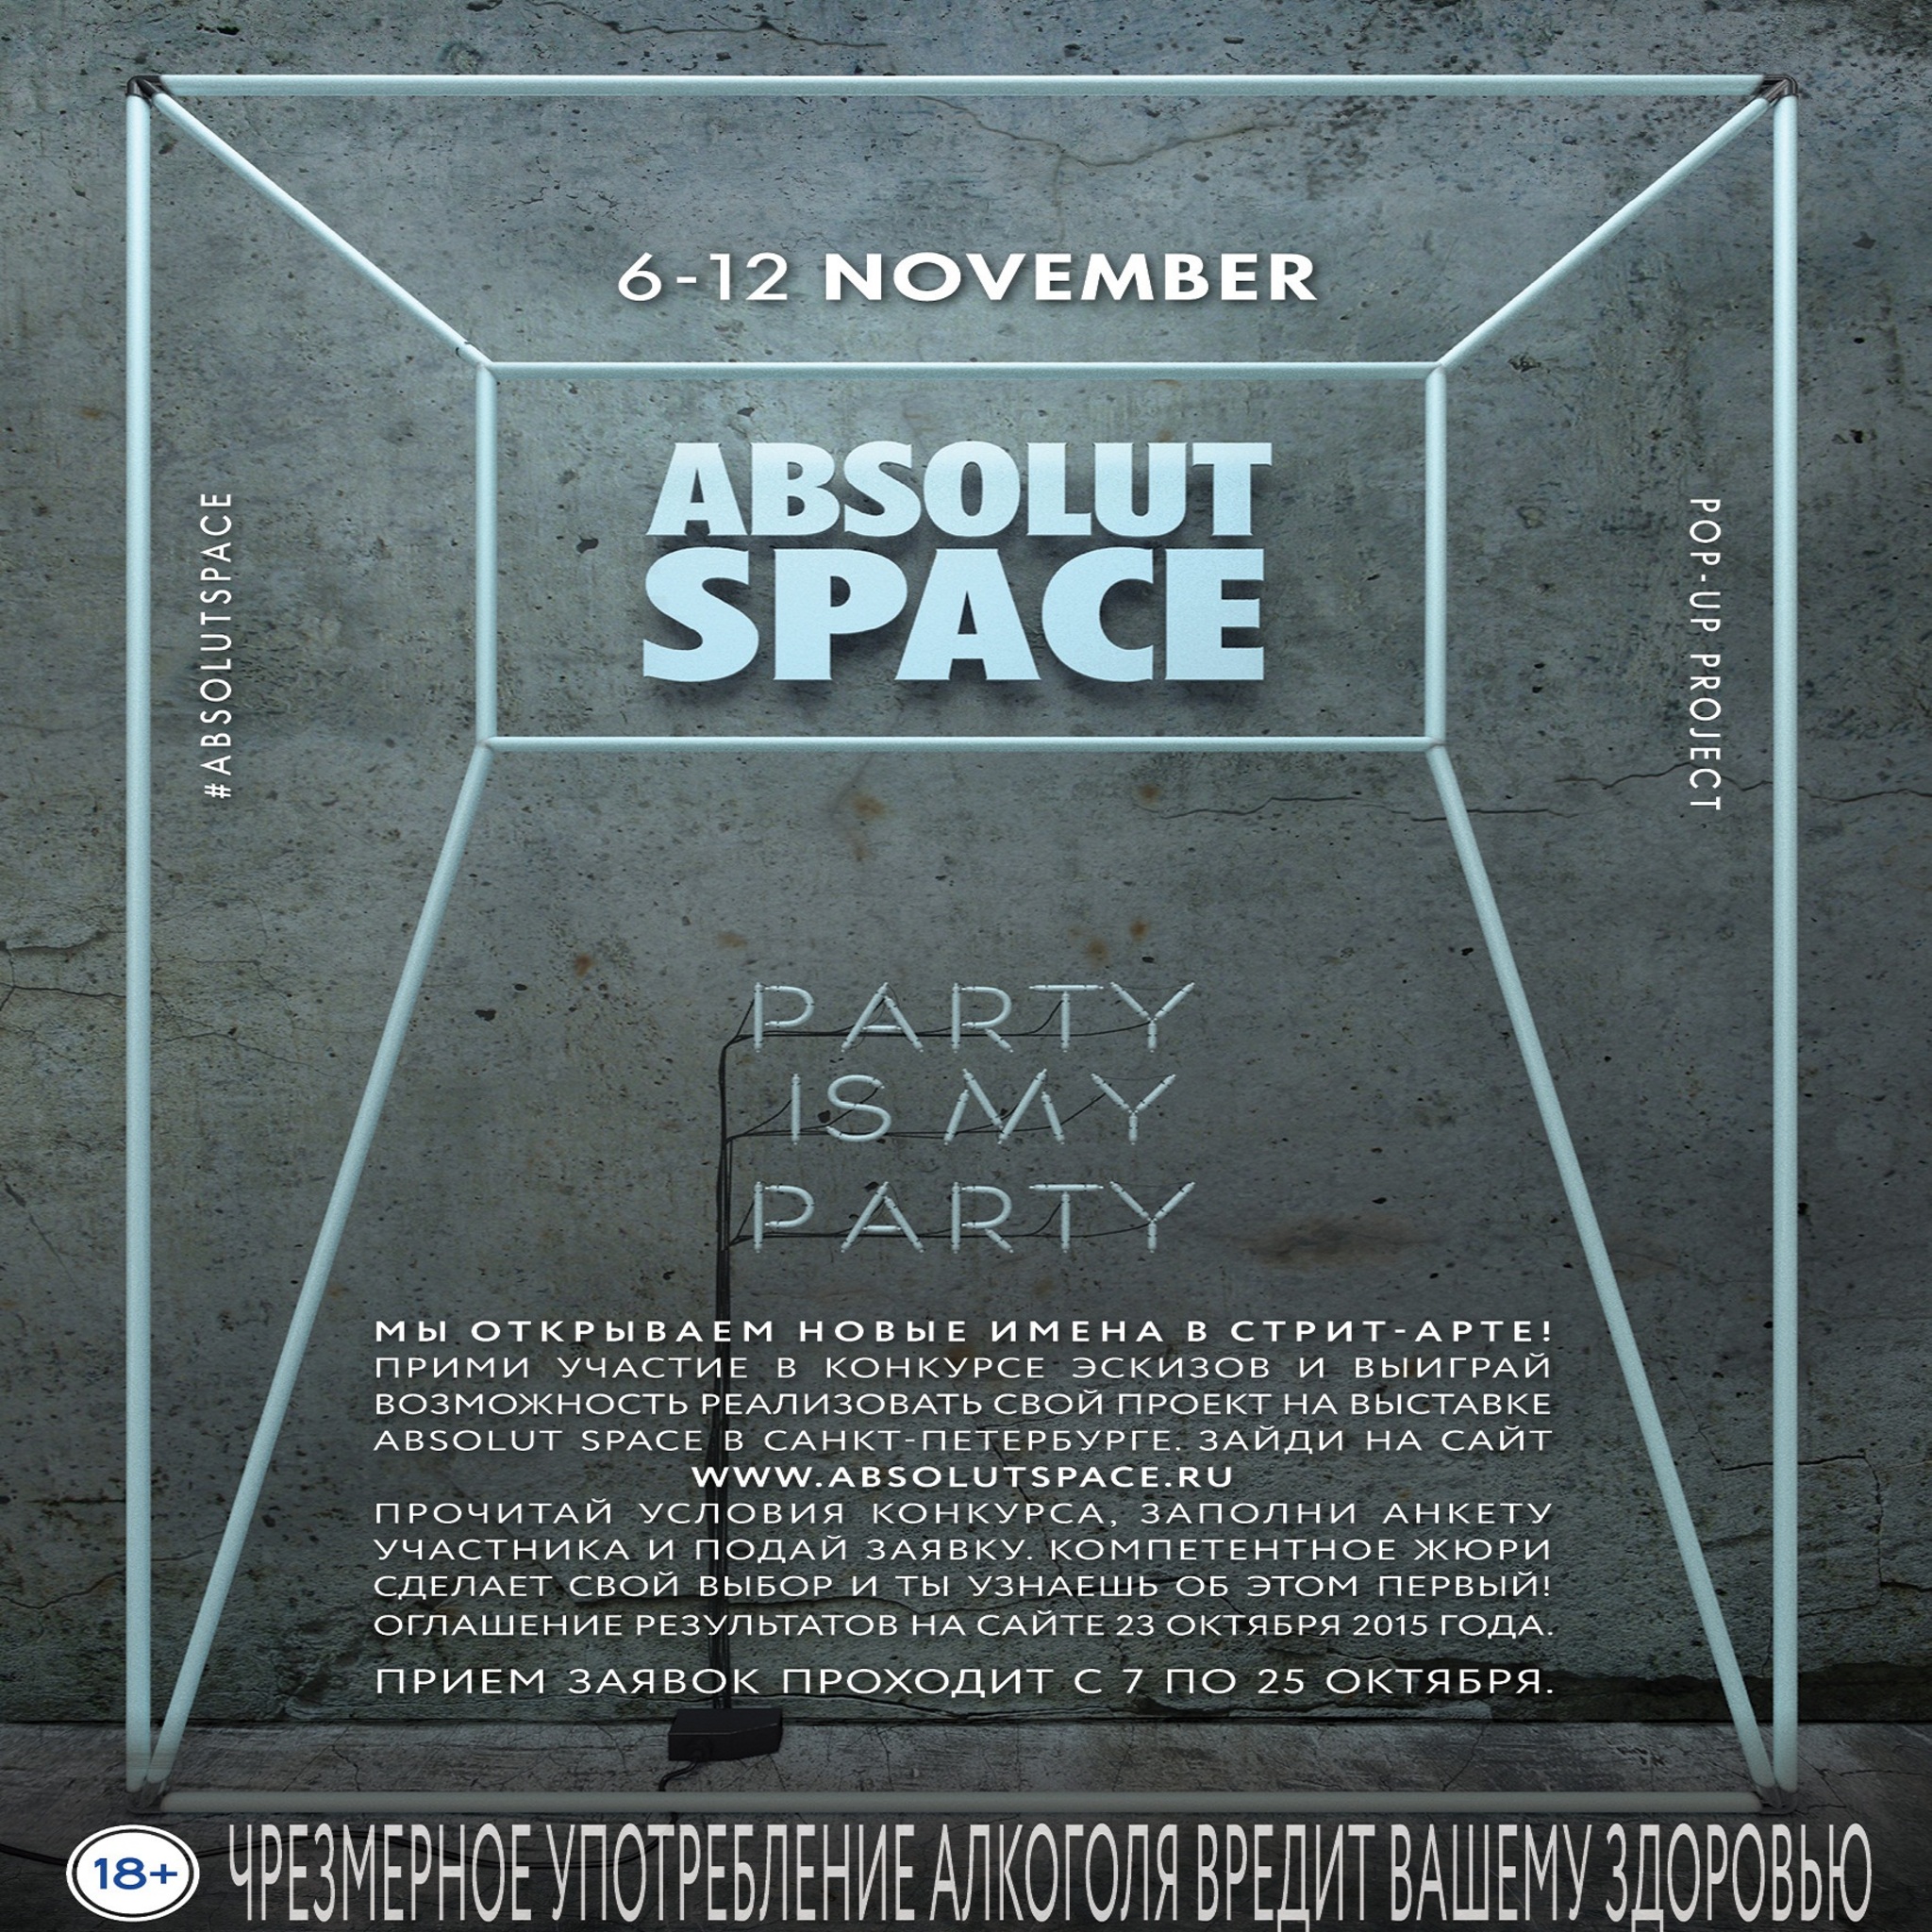 Absolute Space Exhibition